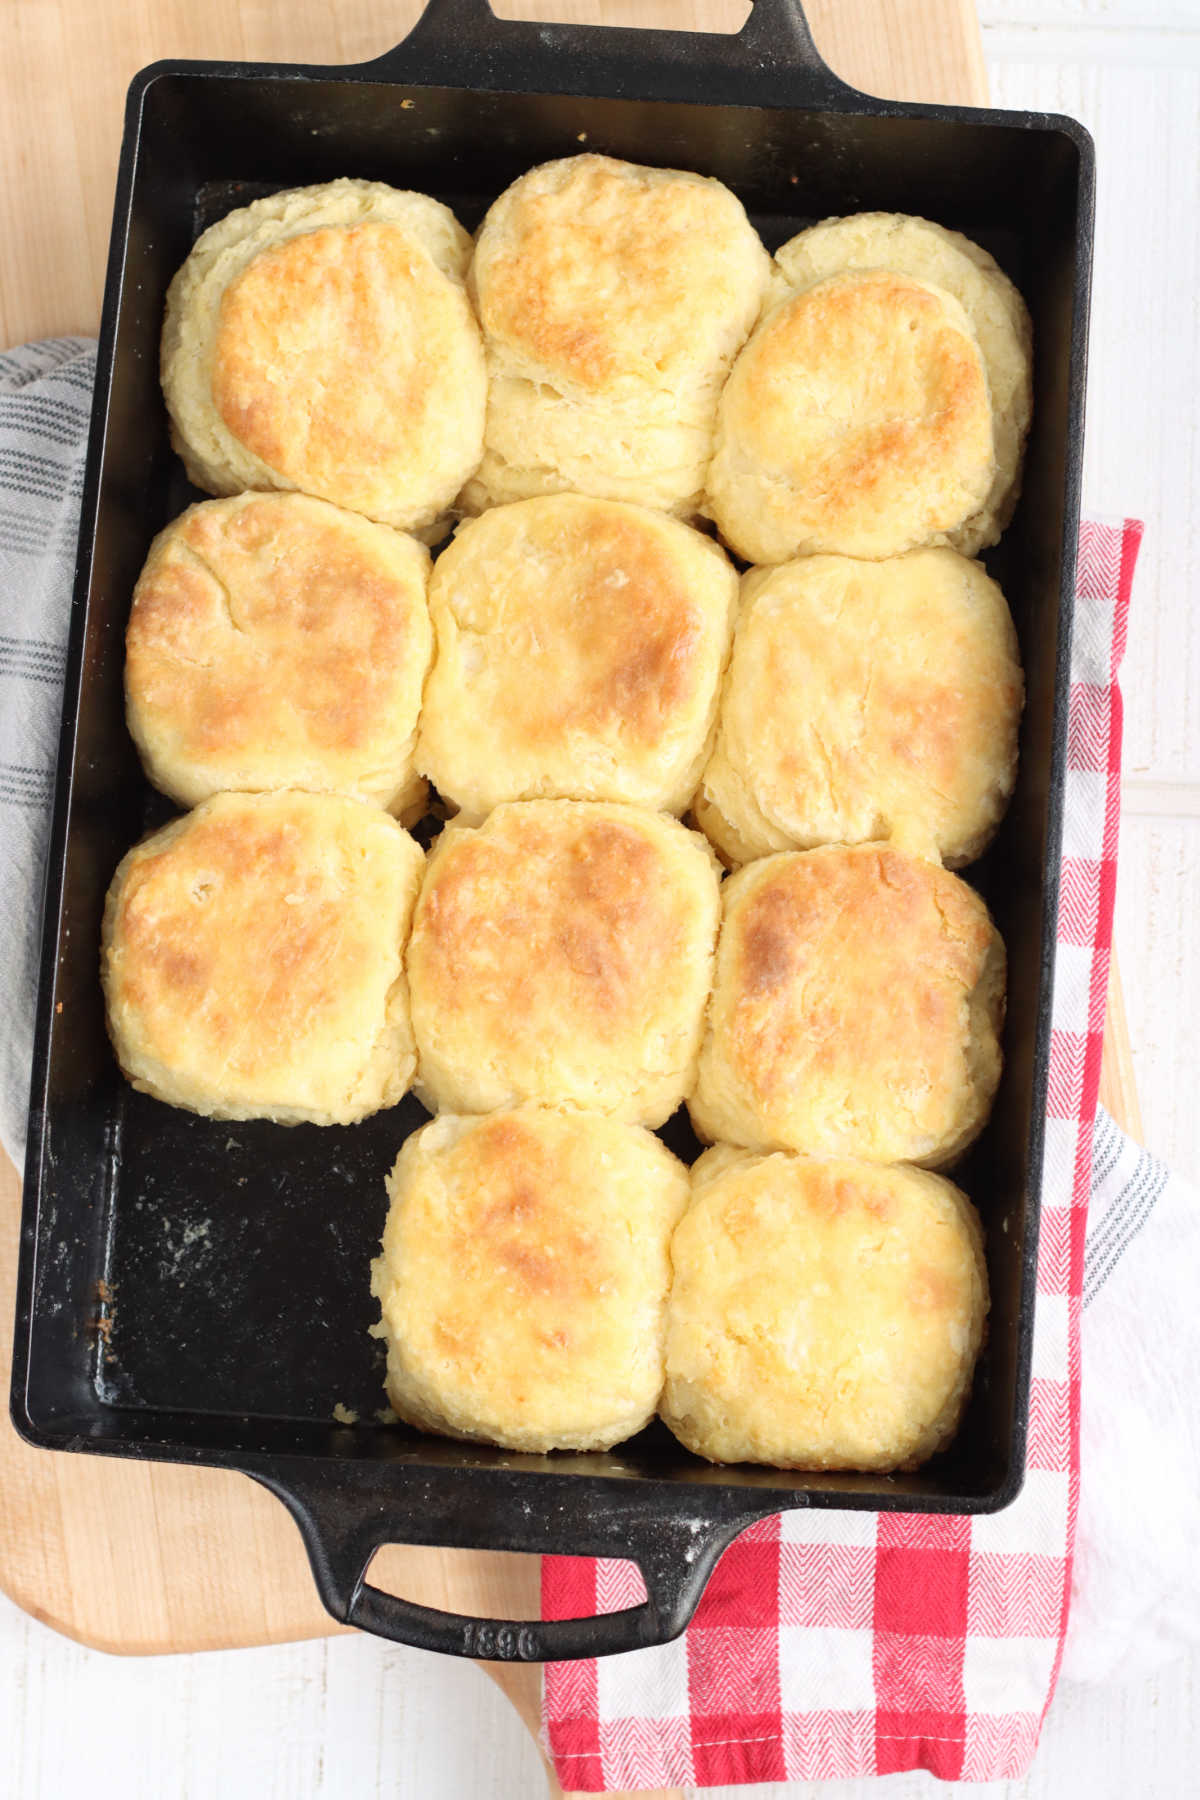 Homemade biscuits in rectangle cast iron pan on wooden cutting board, red and white checker cloth. 